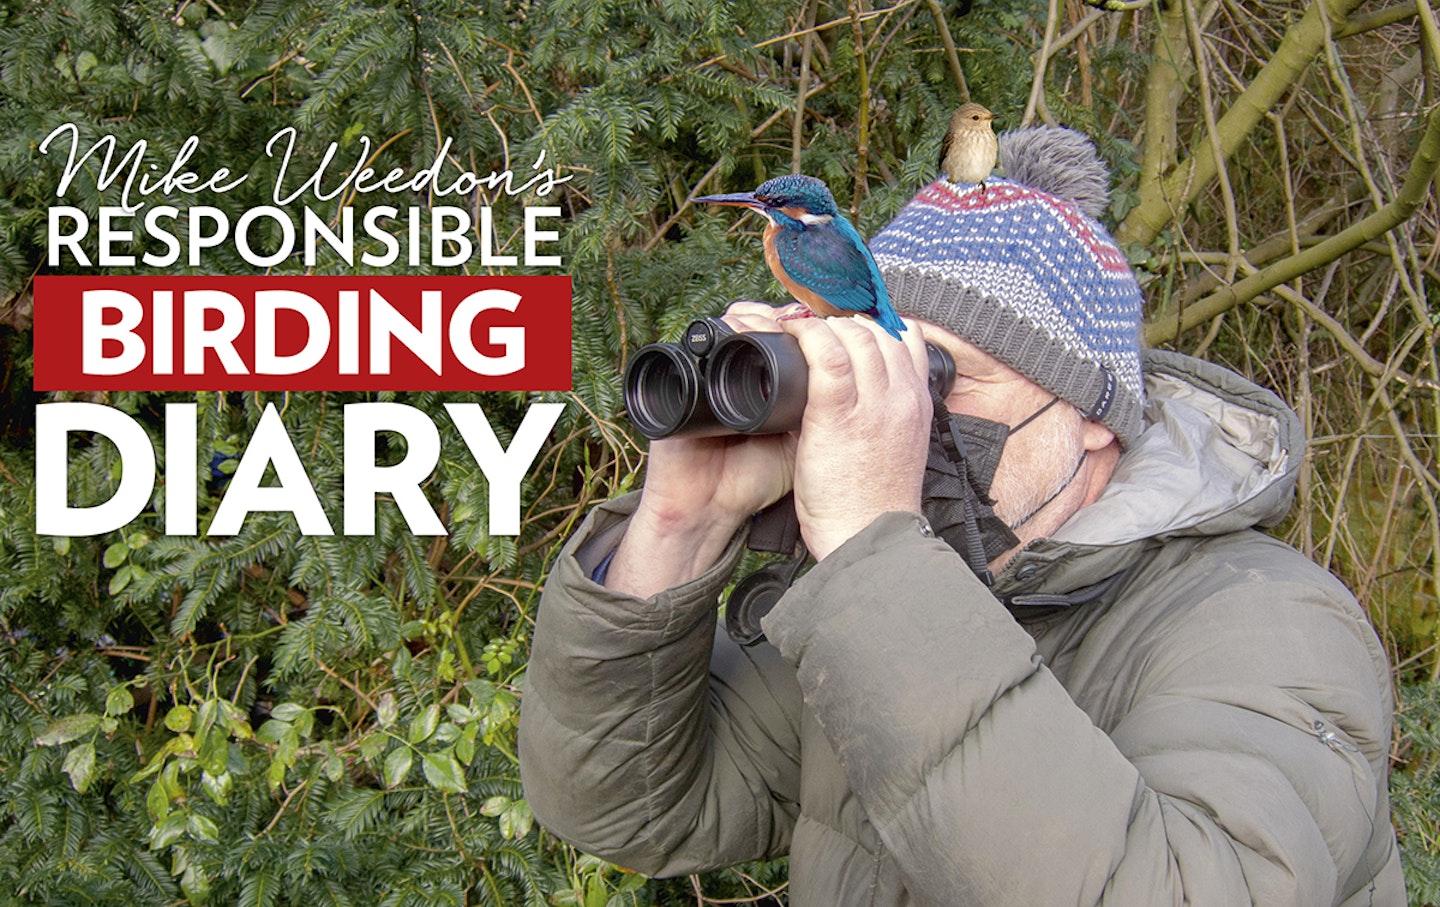 Mike Weedon's new responsible birding diary, Features